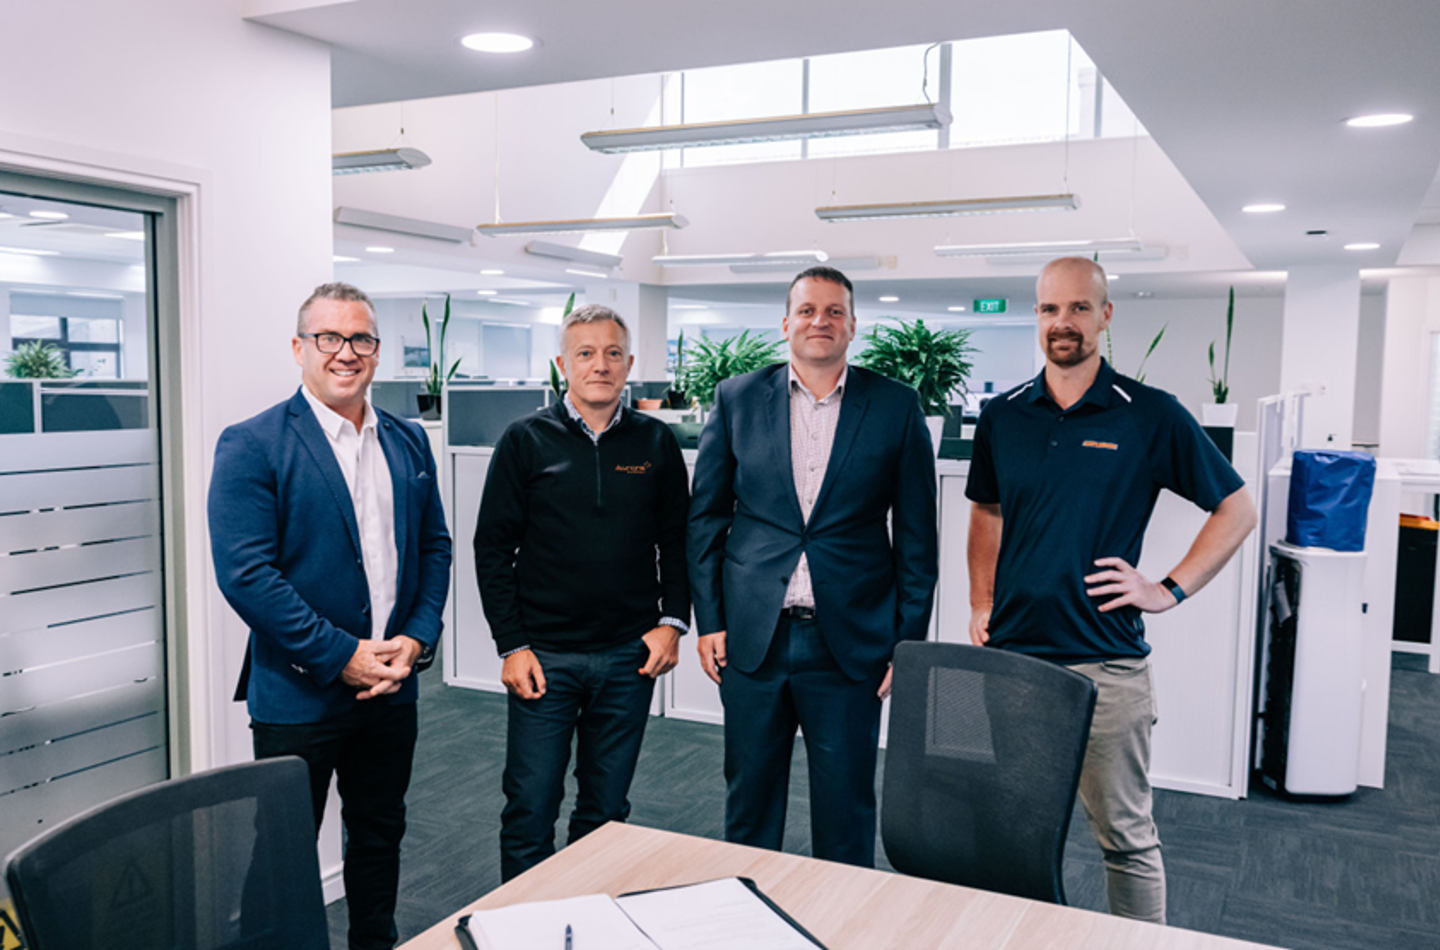 (From left) Troy Fazakerley, Country Manager, Asplundh (NZ); Richard Fletcher, Chief Executive, Aurora Energy; Richard Starkey, General Manager Service Delivery, Aurora Energy; 	Andrew Milligan, Contract Manager, Asplundh (NZ)